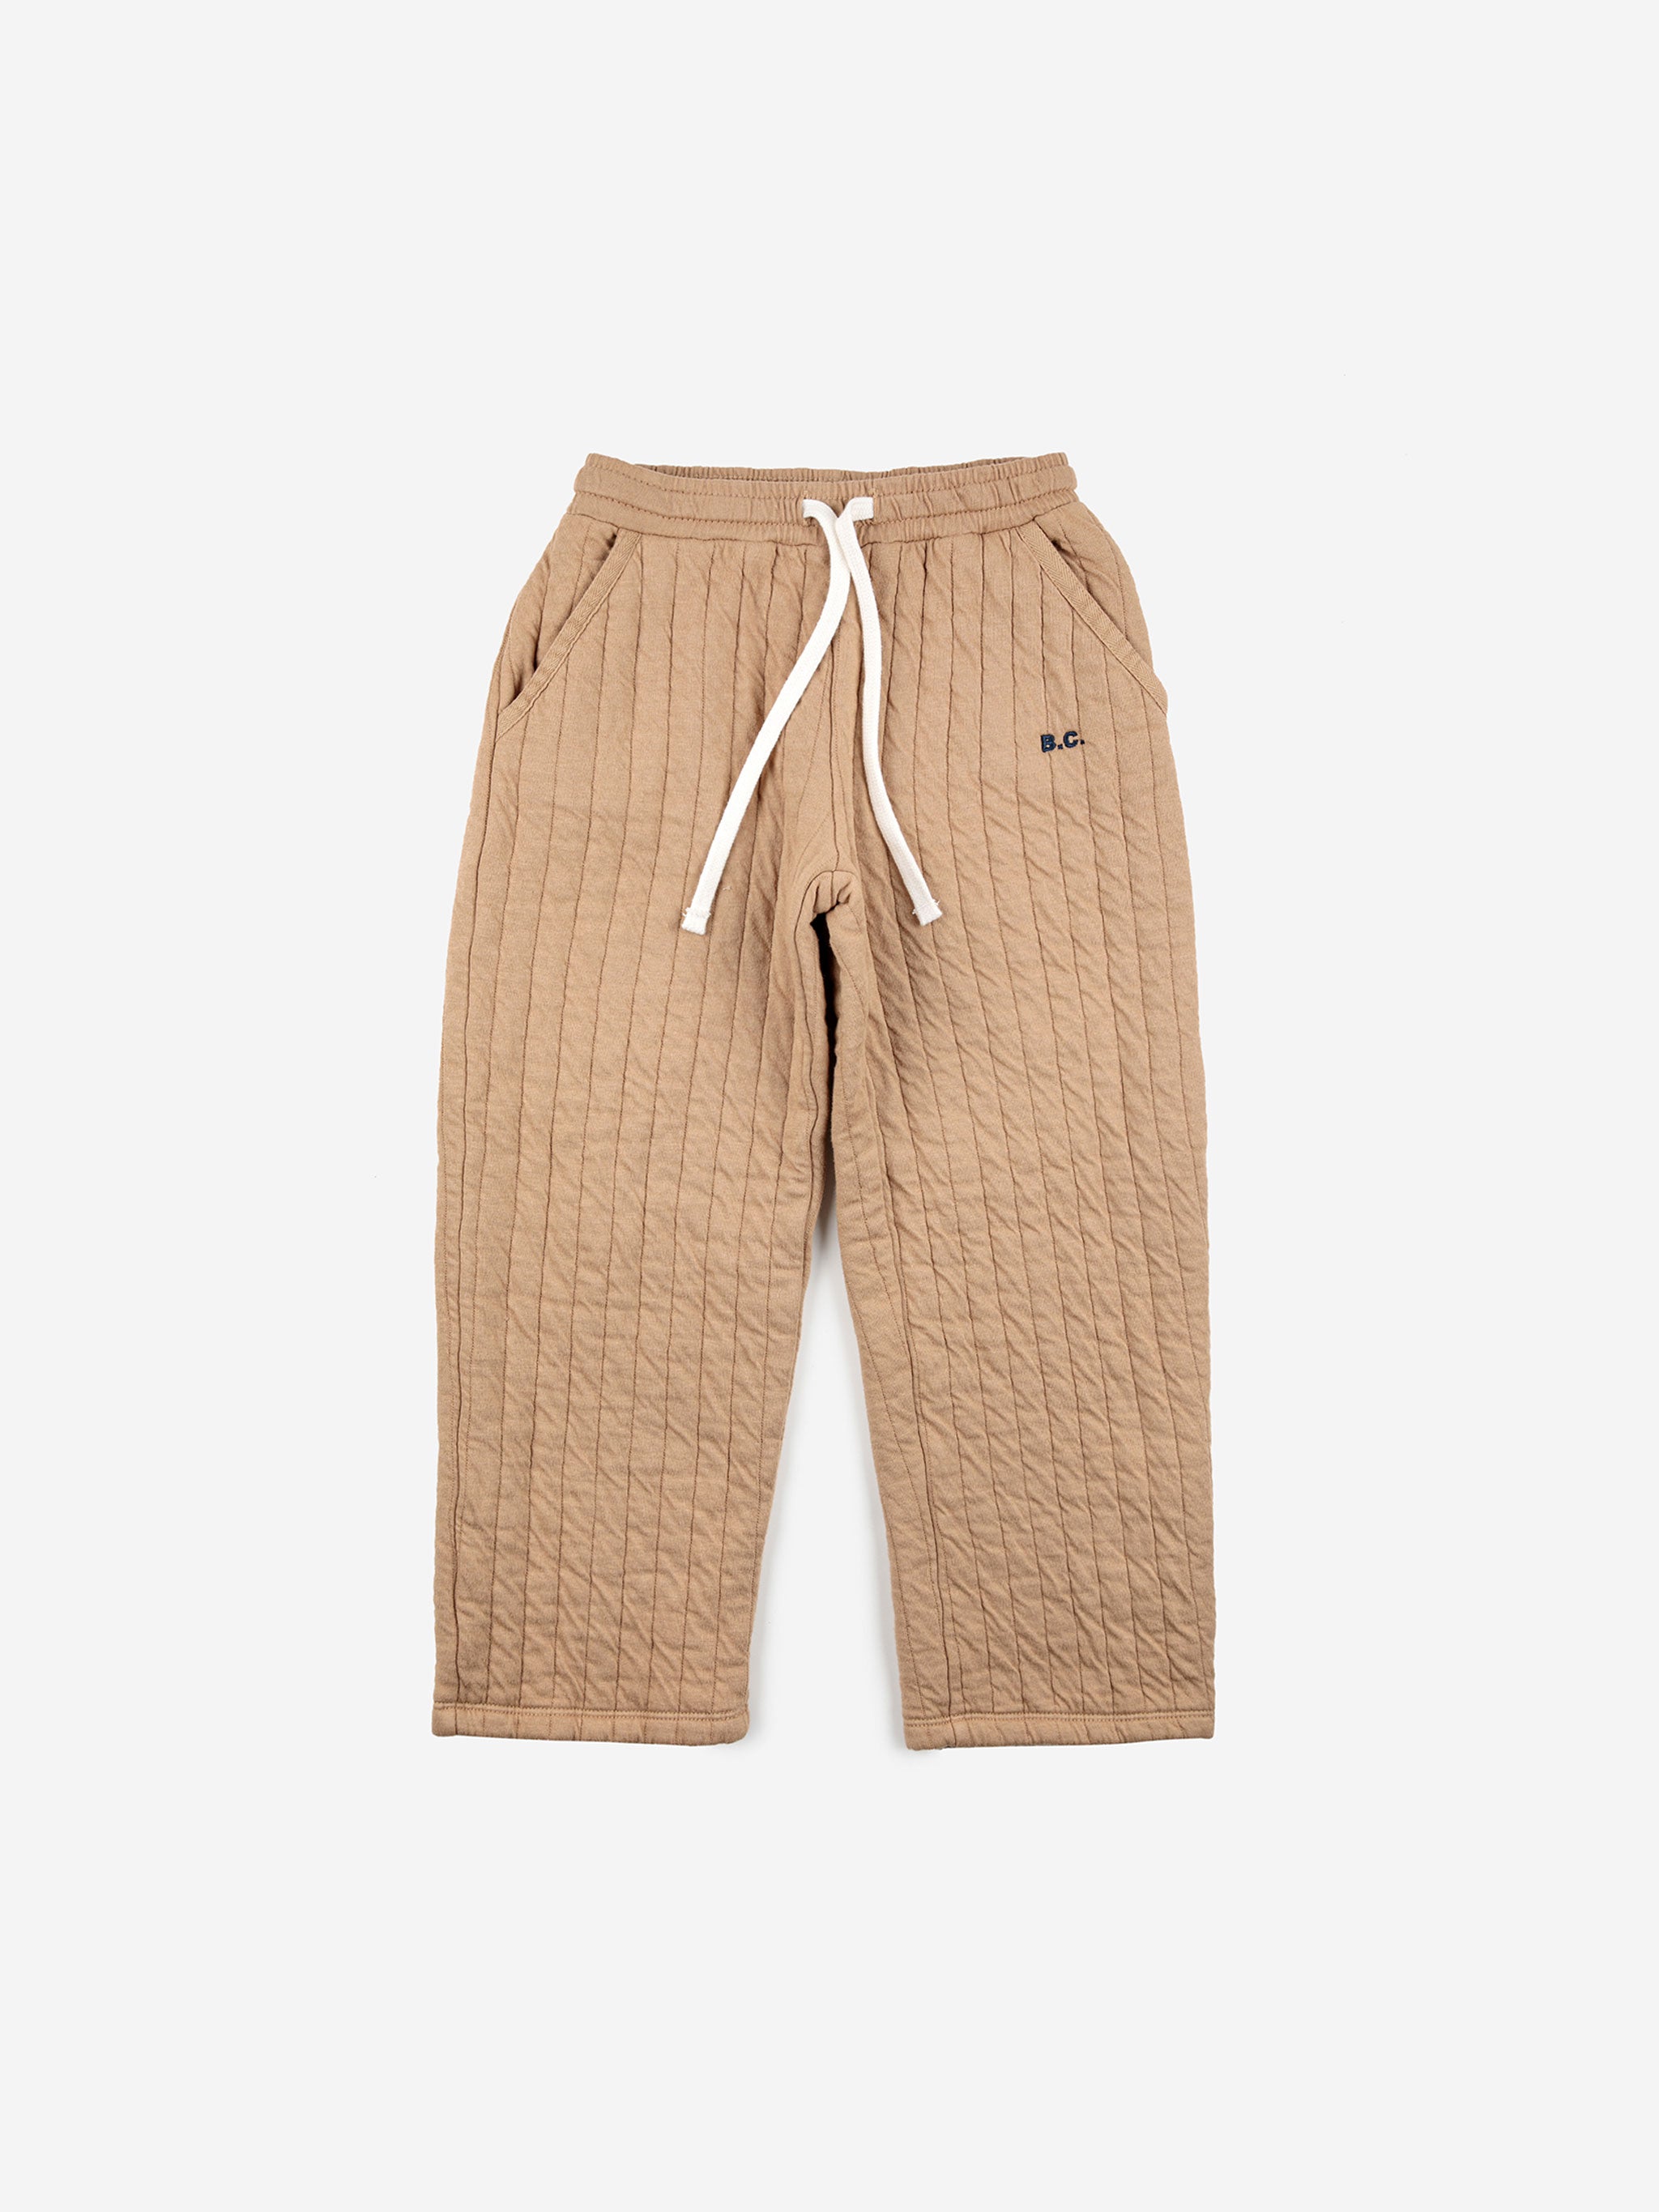 B.C quilted jogging pants – Bobo Choses